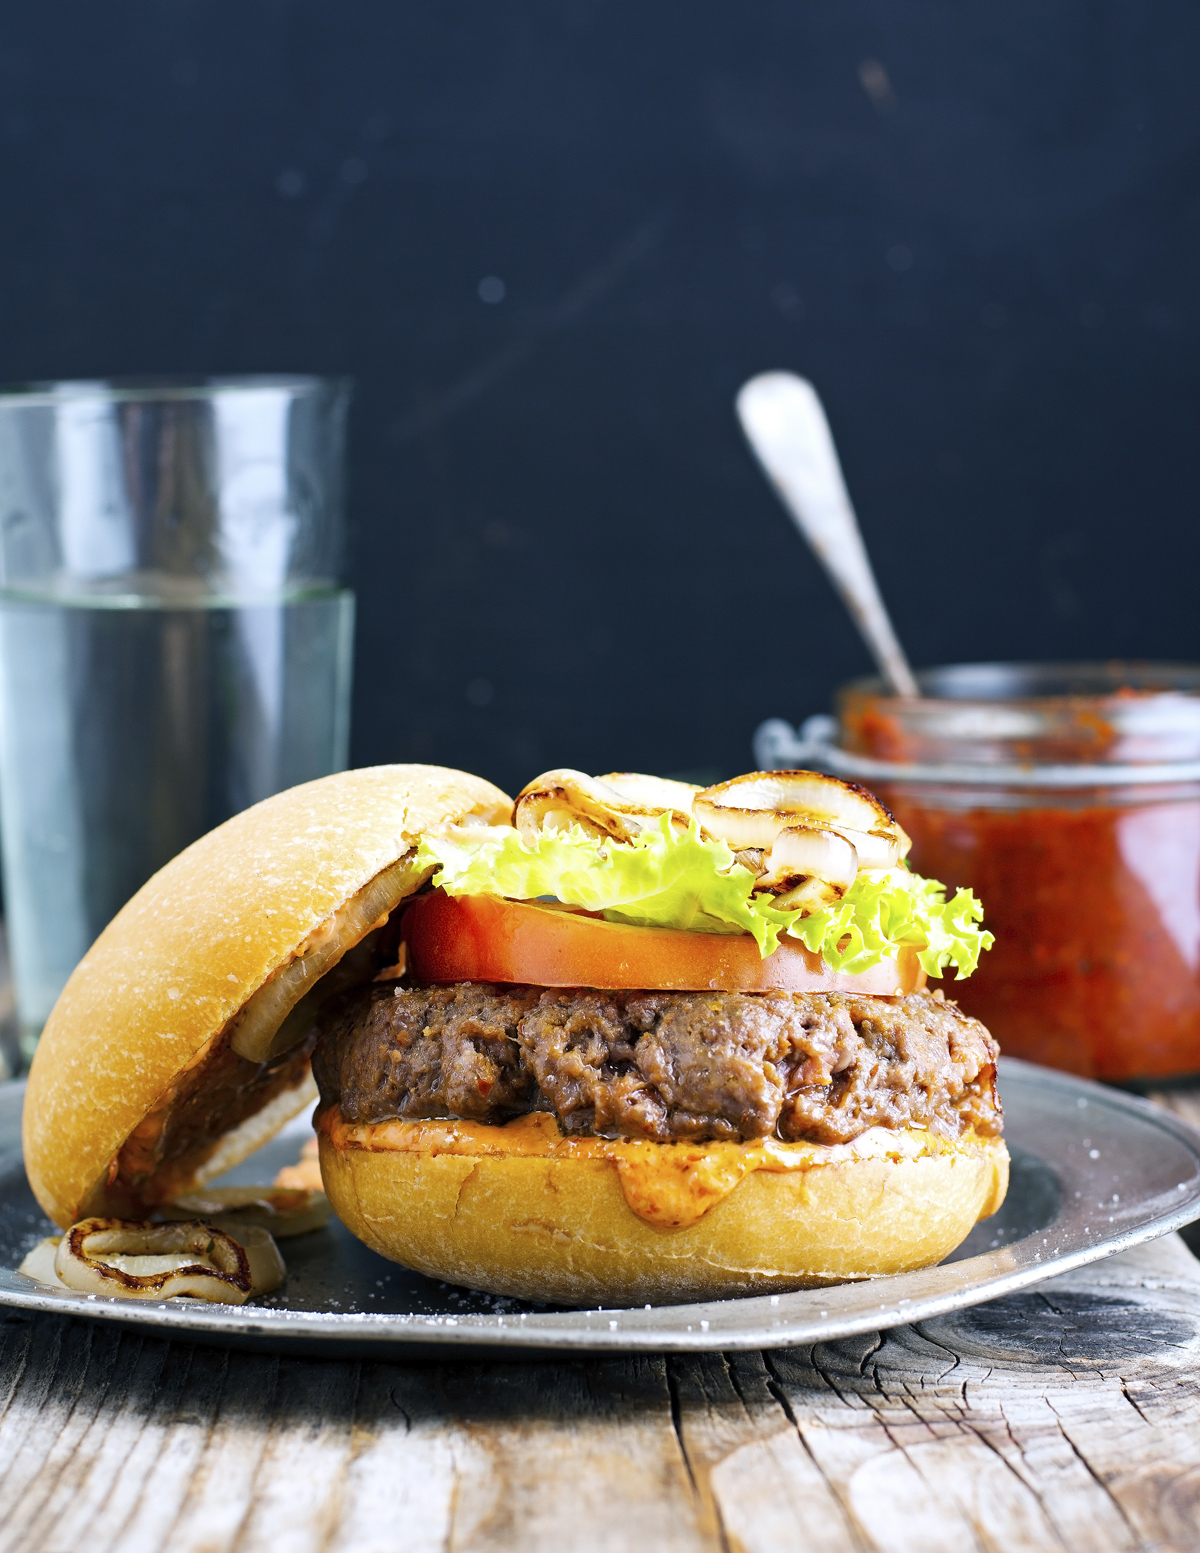 Moroccan-Spiced Burgers with Harissa Mayo